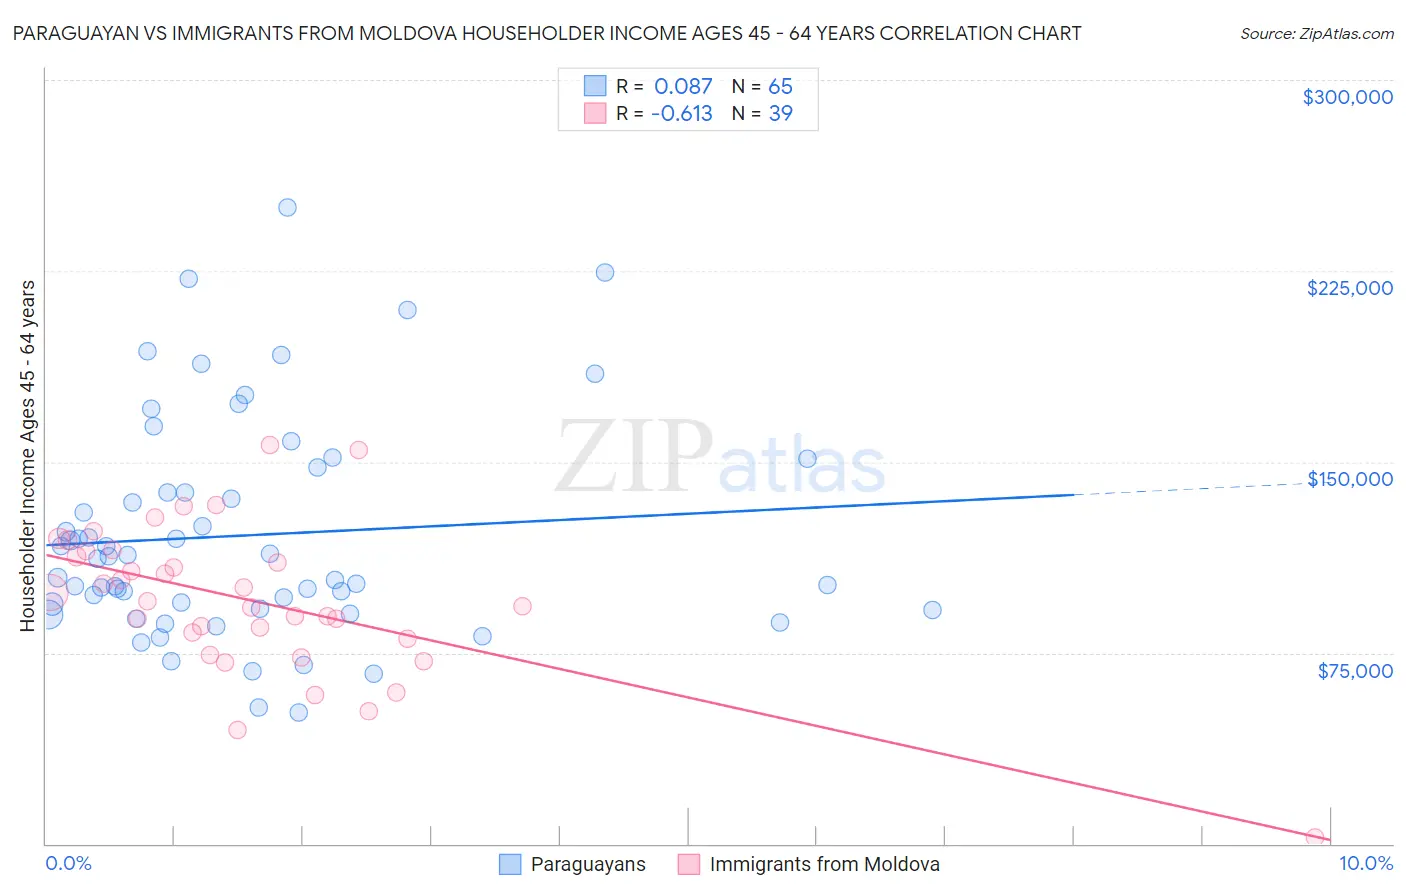 Paraguayan vs Immigrants from Moldova Householder Income Ages 45 - 64 years